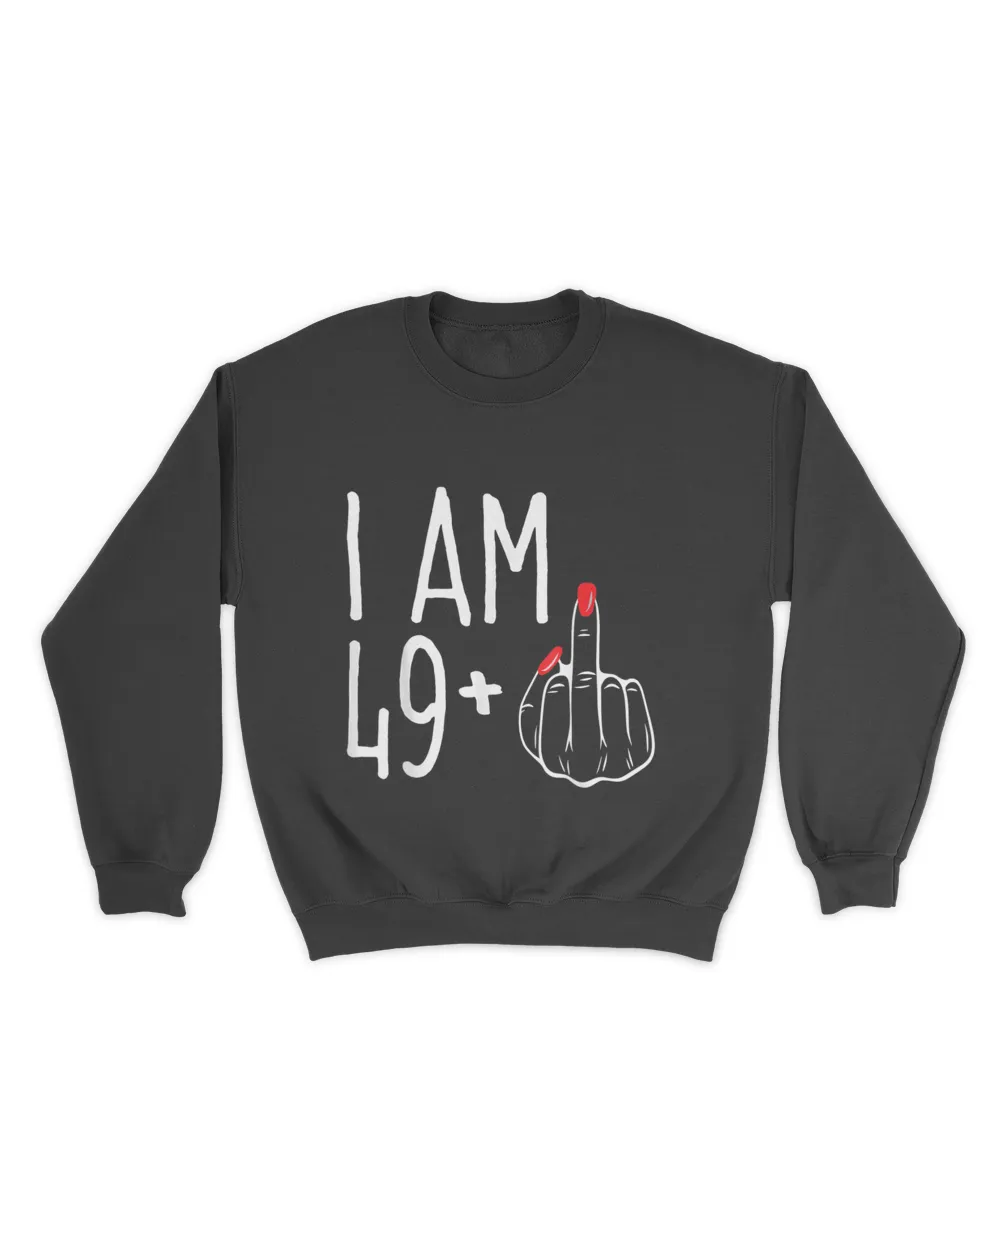 I Am 49 Plus 1 Middle Finger Funny 50th Women's Birthday T-Shirt